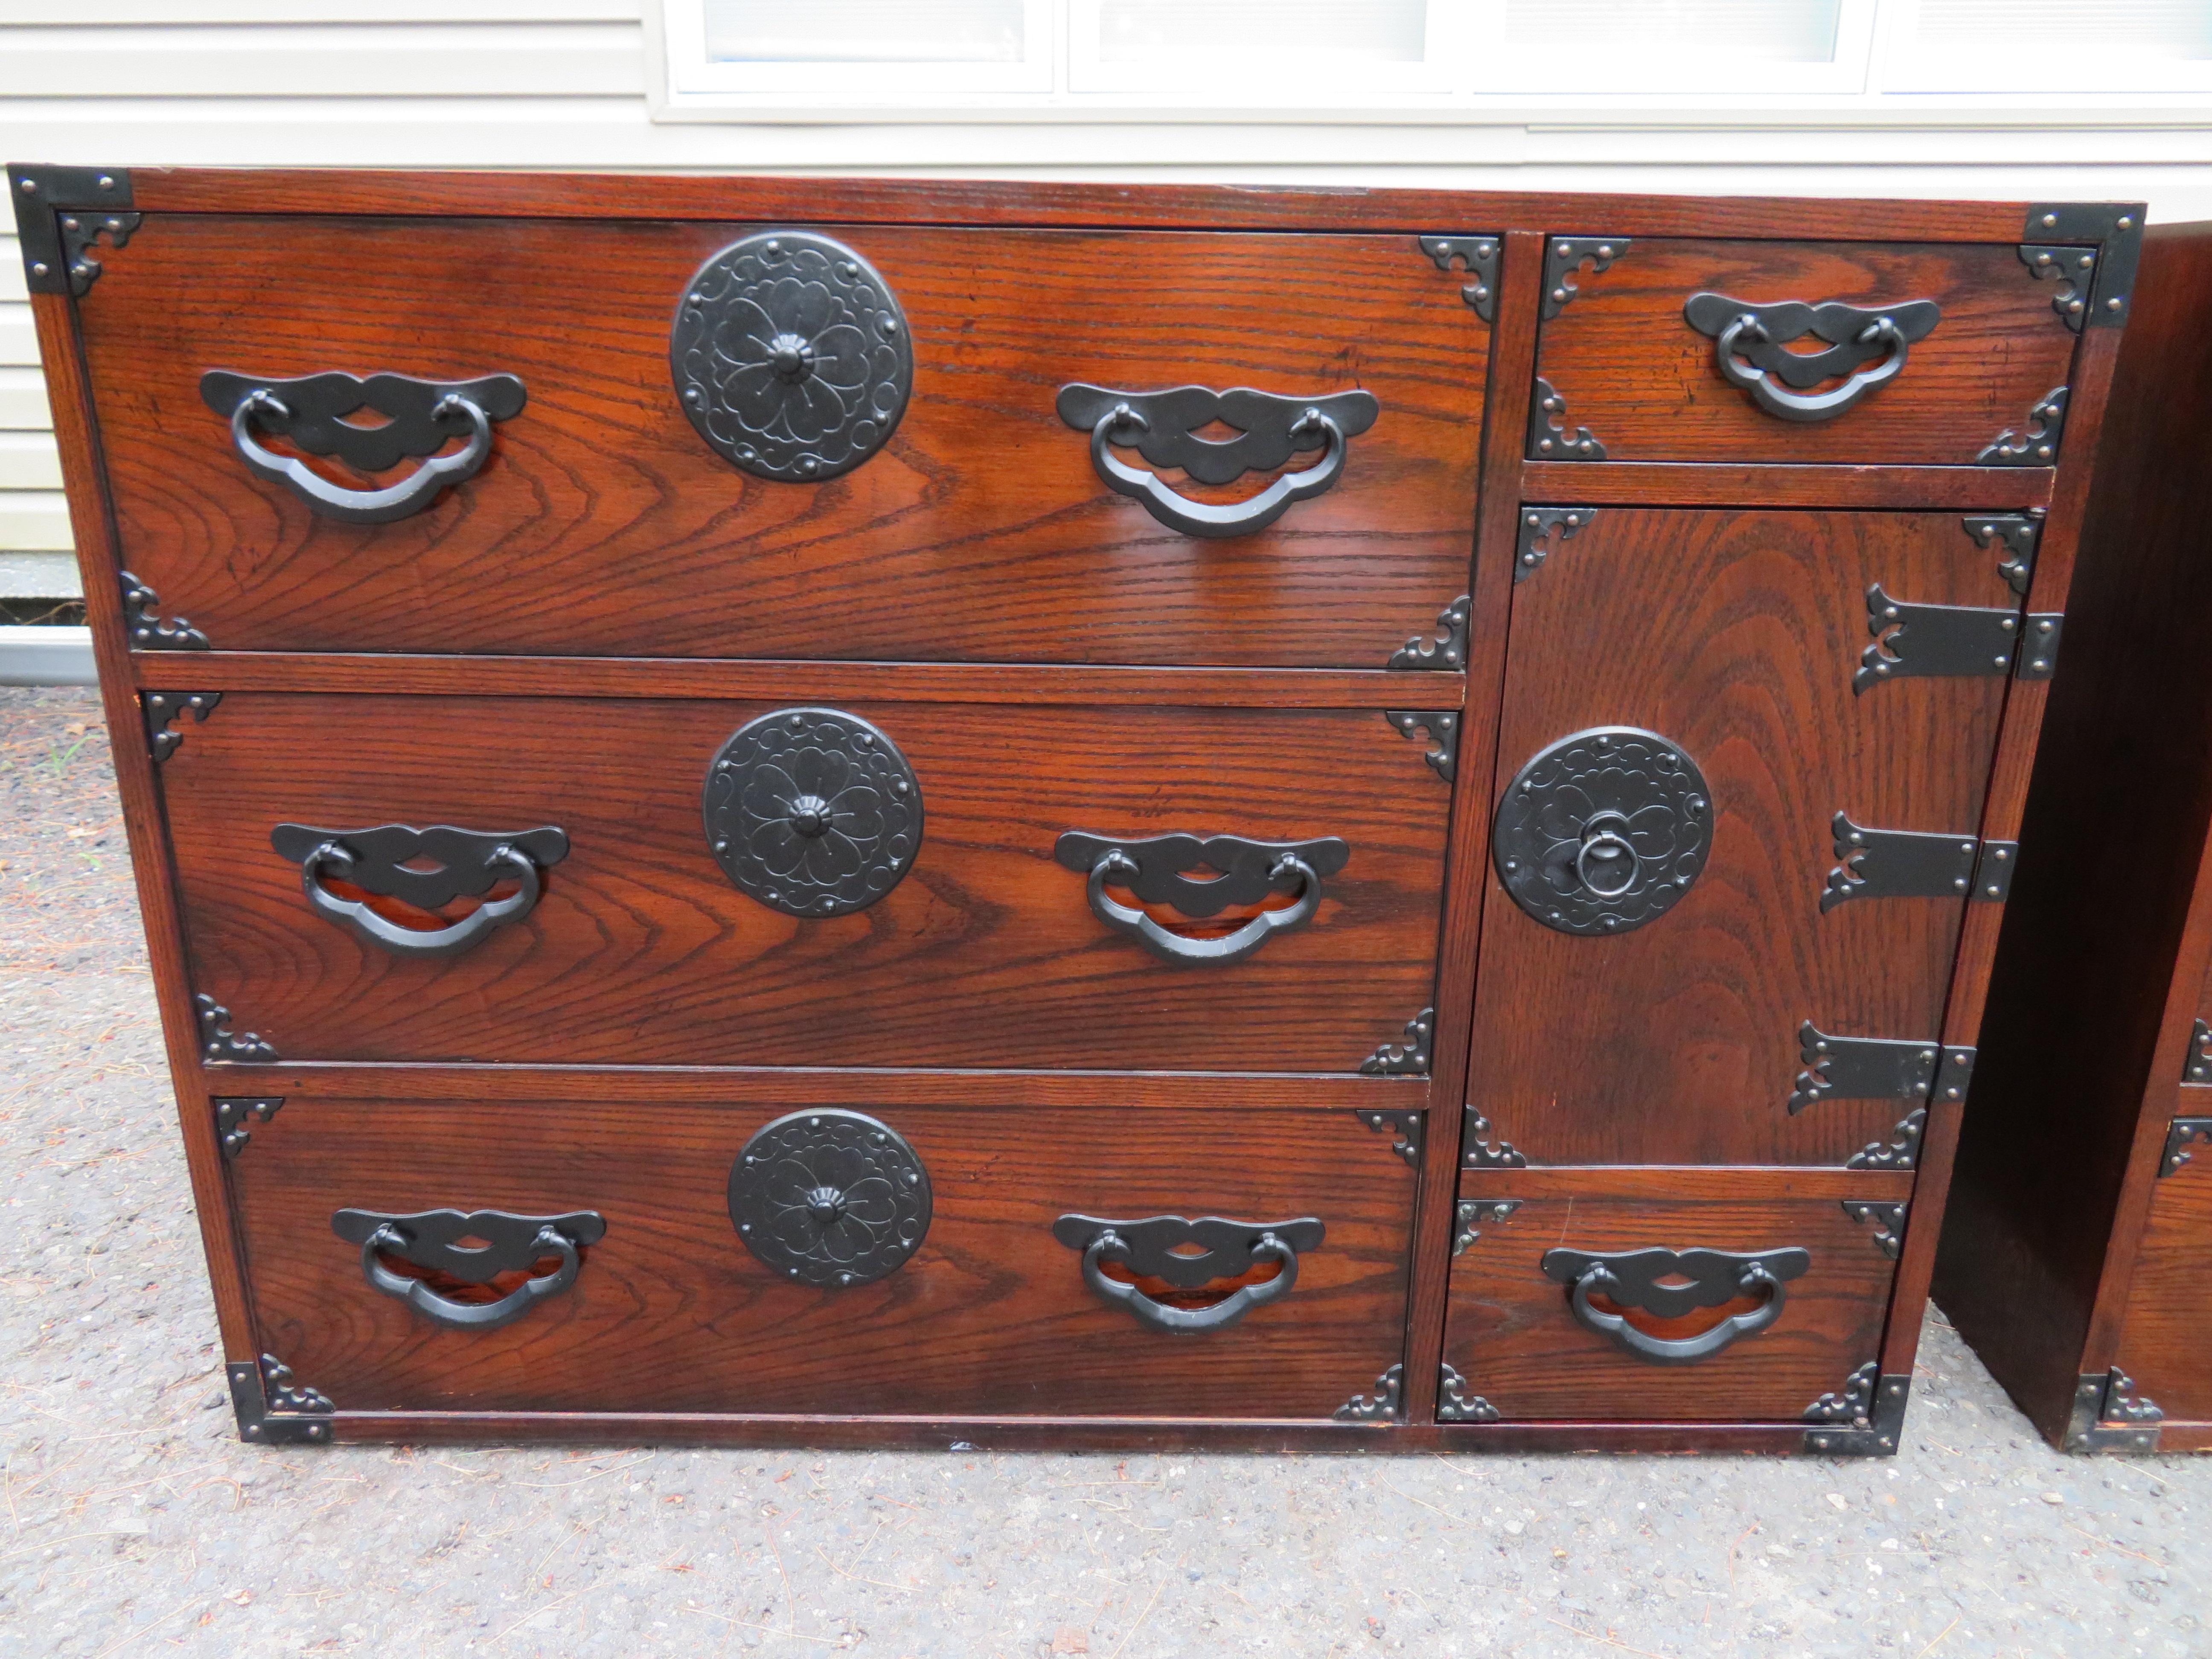 Amazingly beautiful pair of Japanese Tansu bachelors chests by Baker. Dark stained oak with fantastic Japanese-inspired hardware. They have a time-worn patina with splendid charm. I love the vintage look of these- give your interior real Mid-century